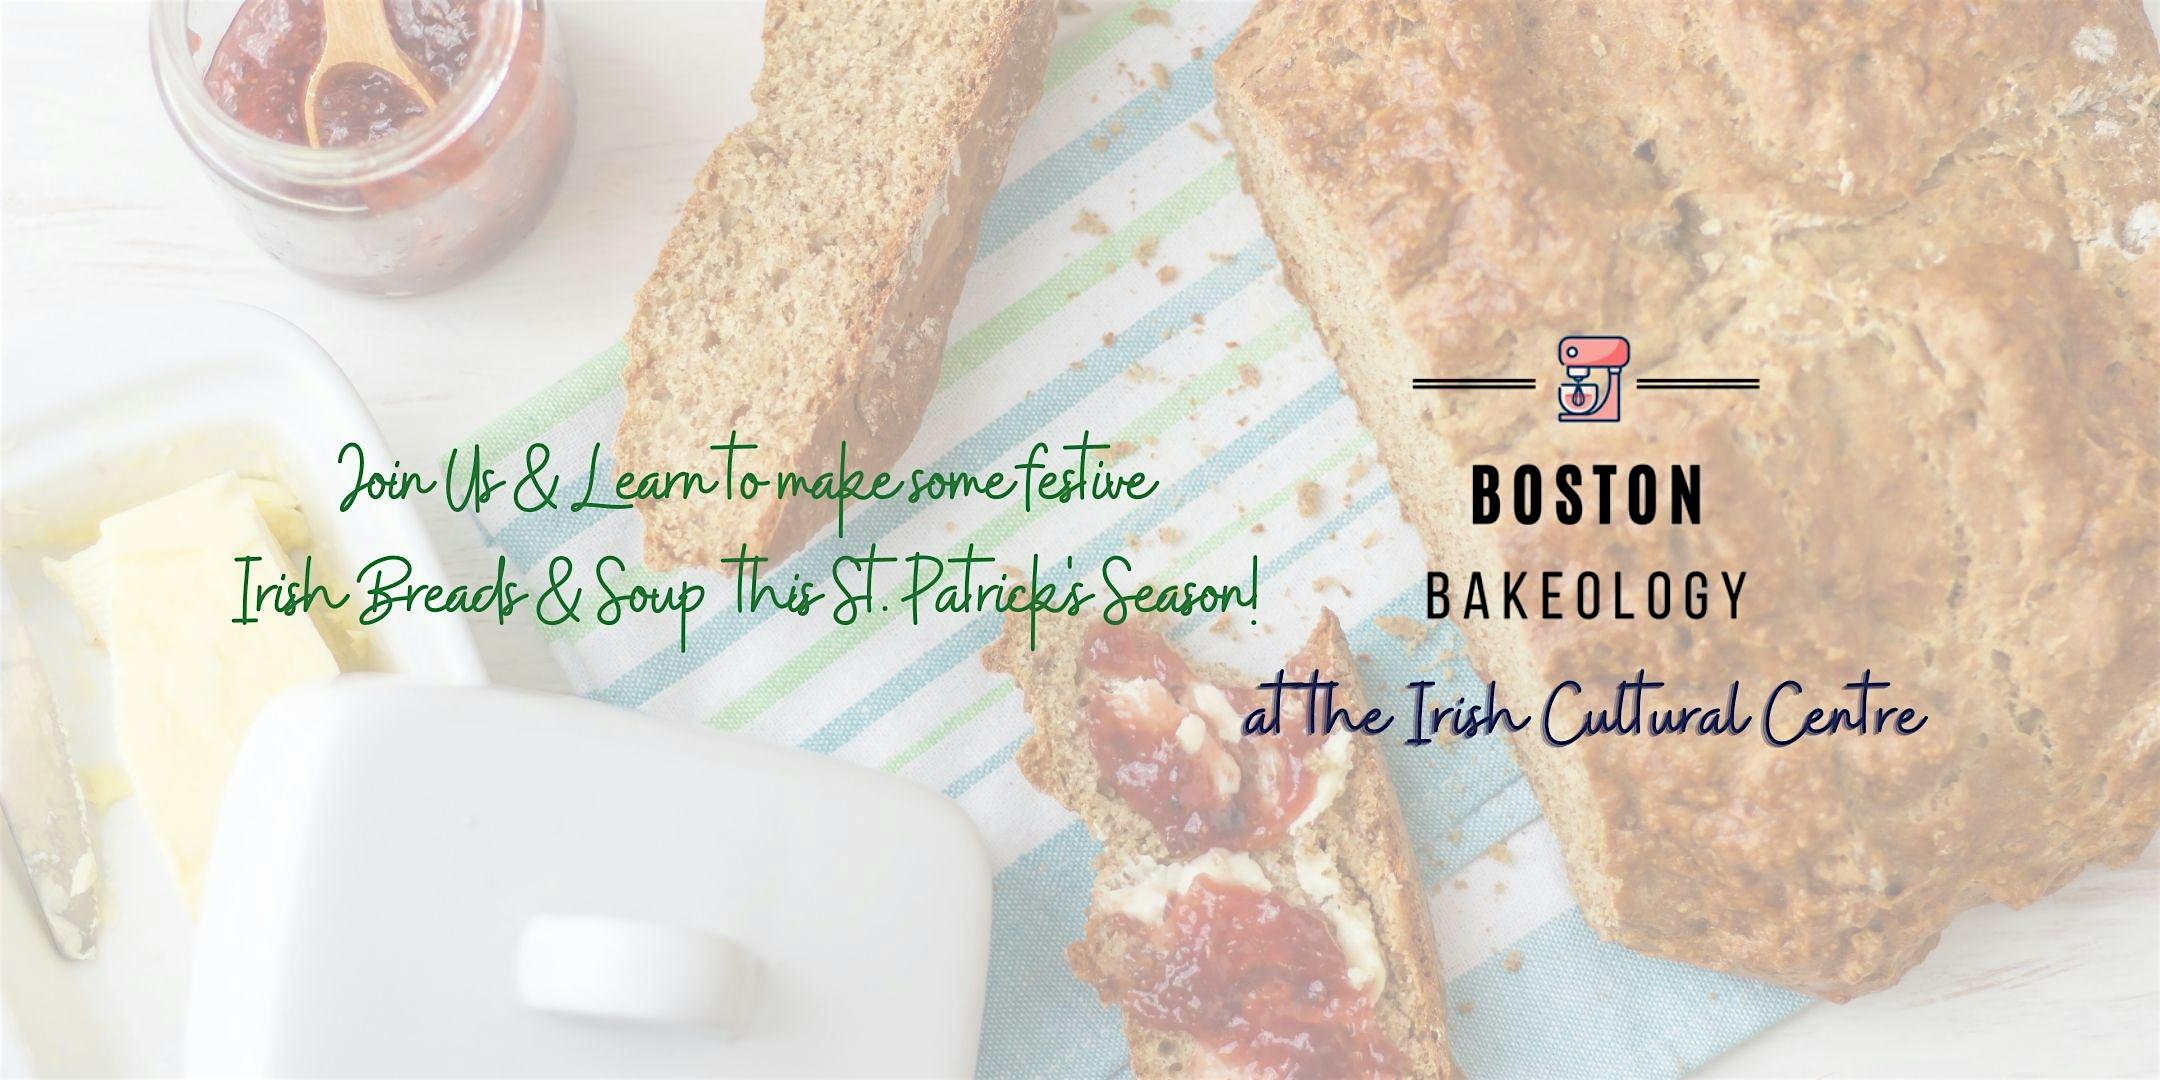 Irish Breads, Soups  & Scones Cookery Class with Boston Bakeology